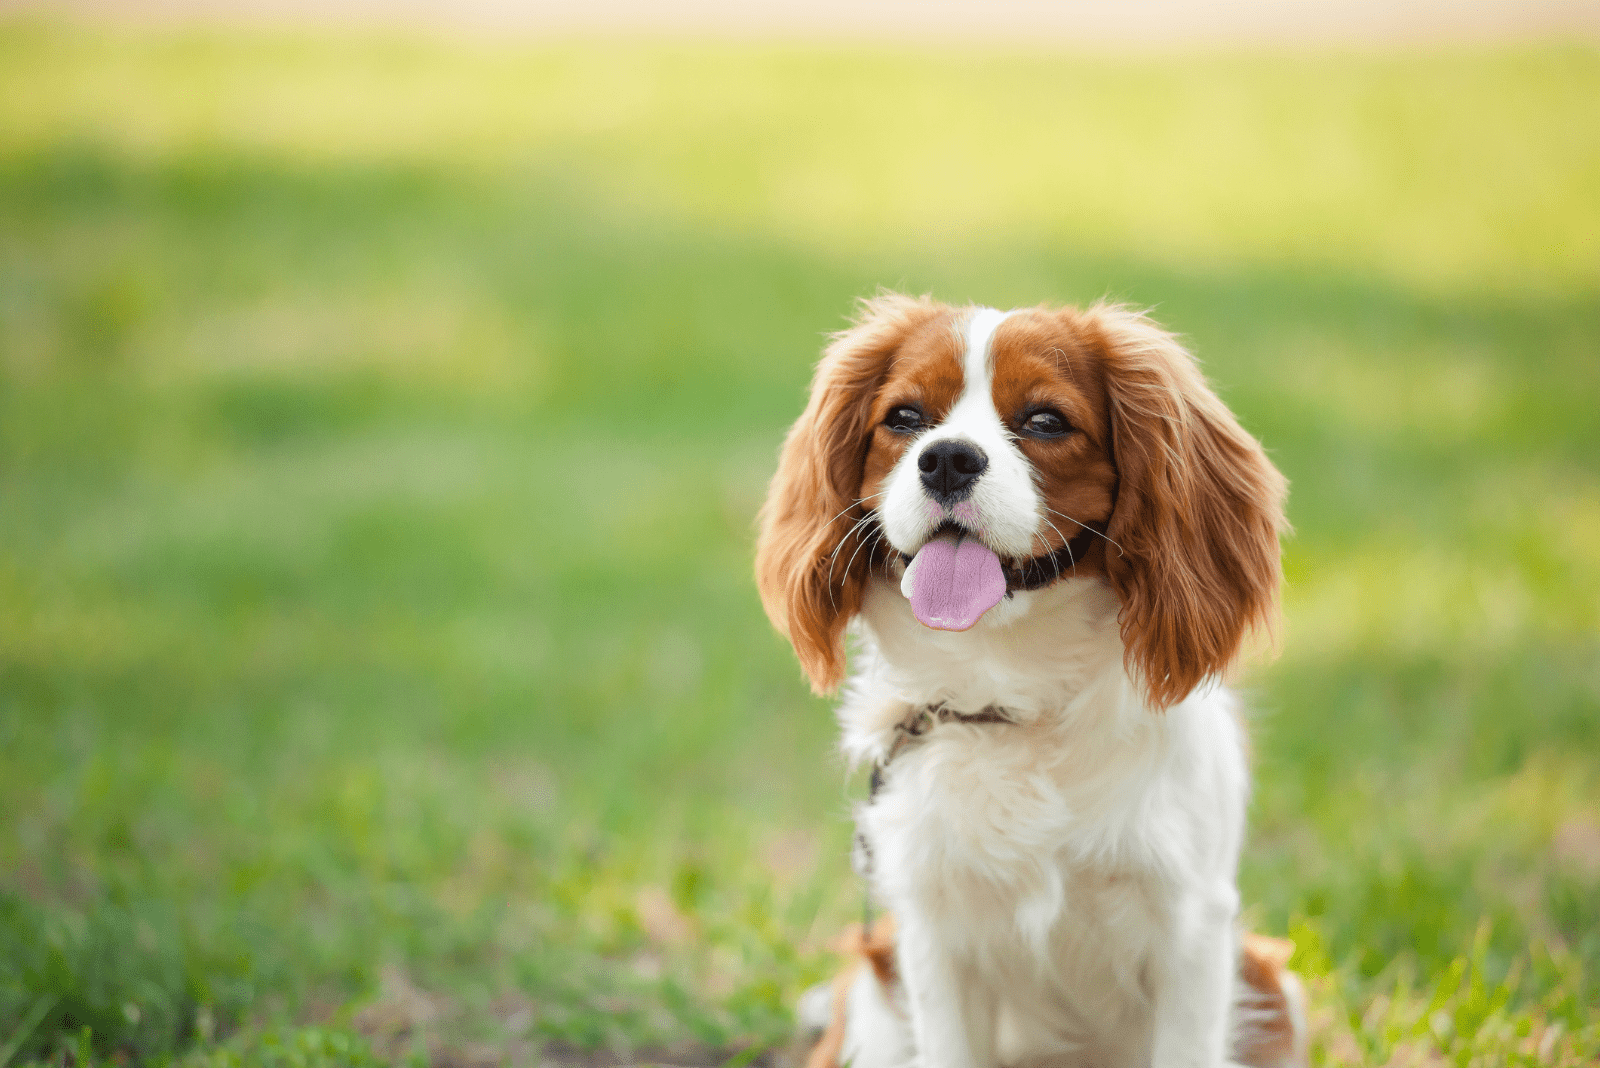 Cavalier King Charles Spaniel sitting on the grass